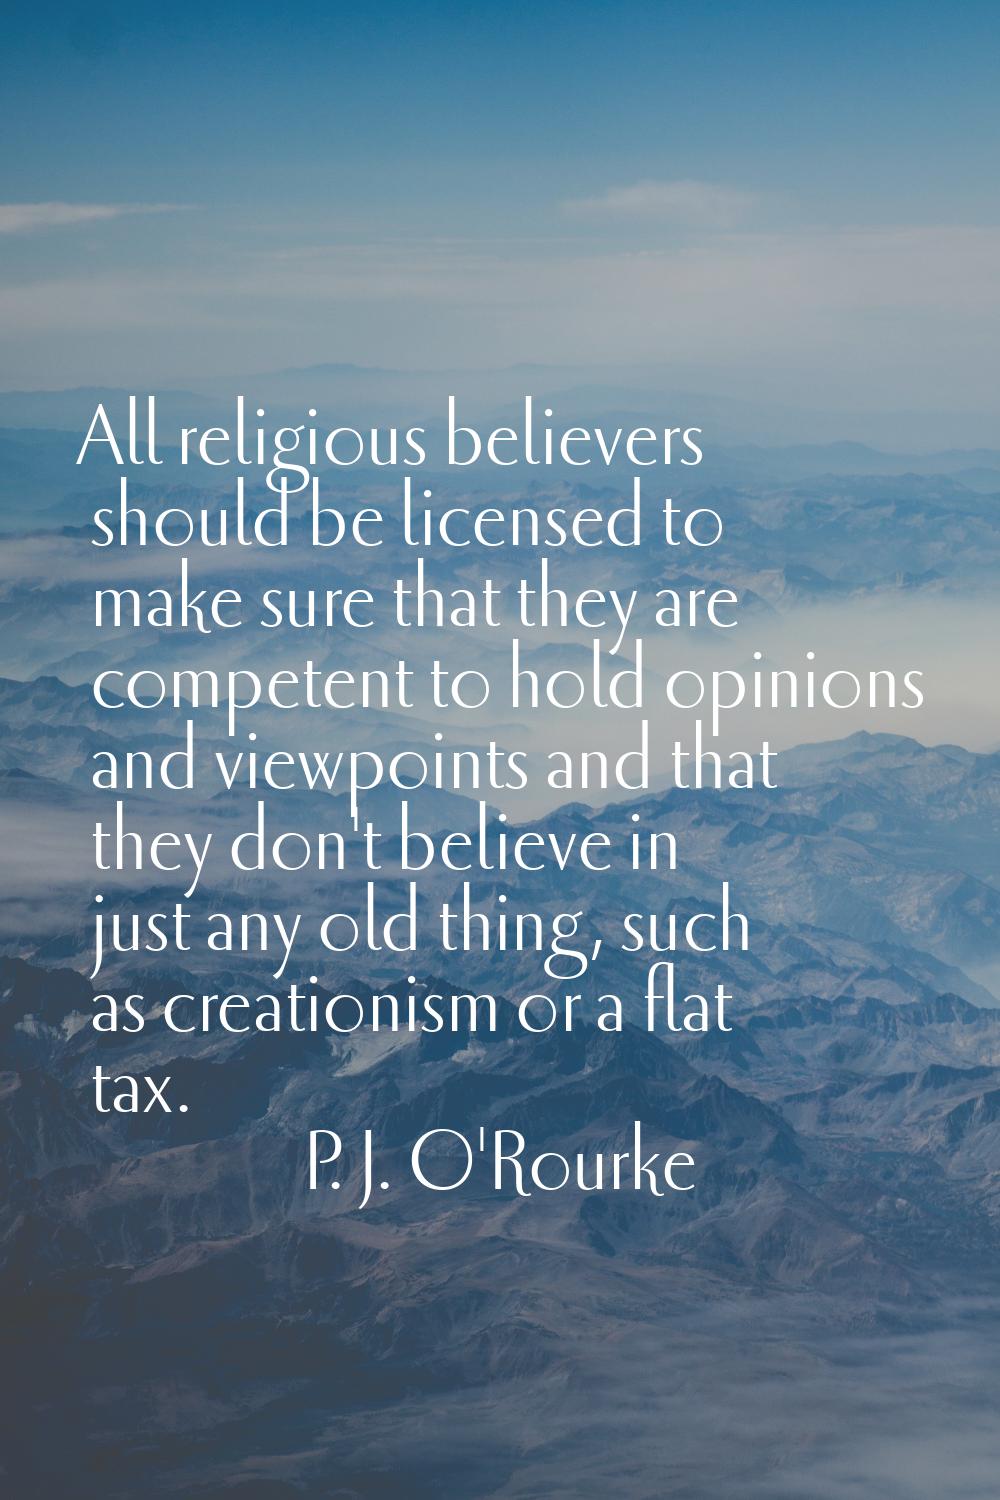 All religious believers should be licensed to make sure that they are competent to hold opinions an